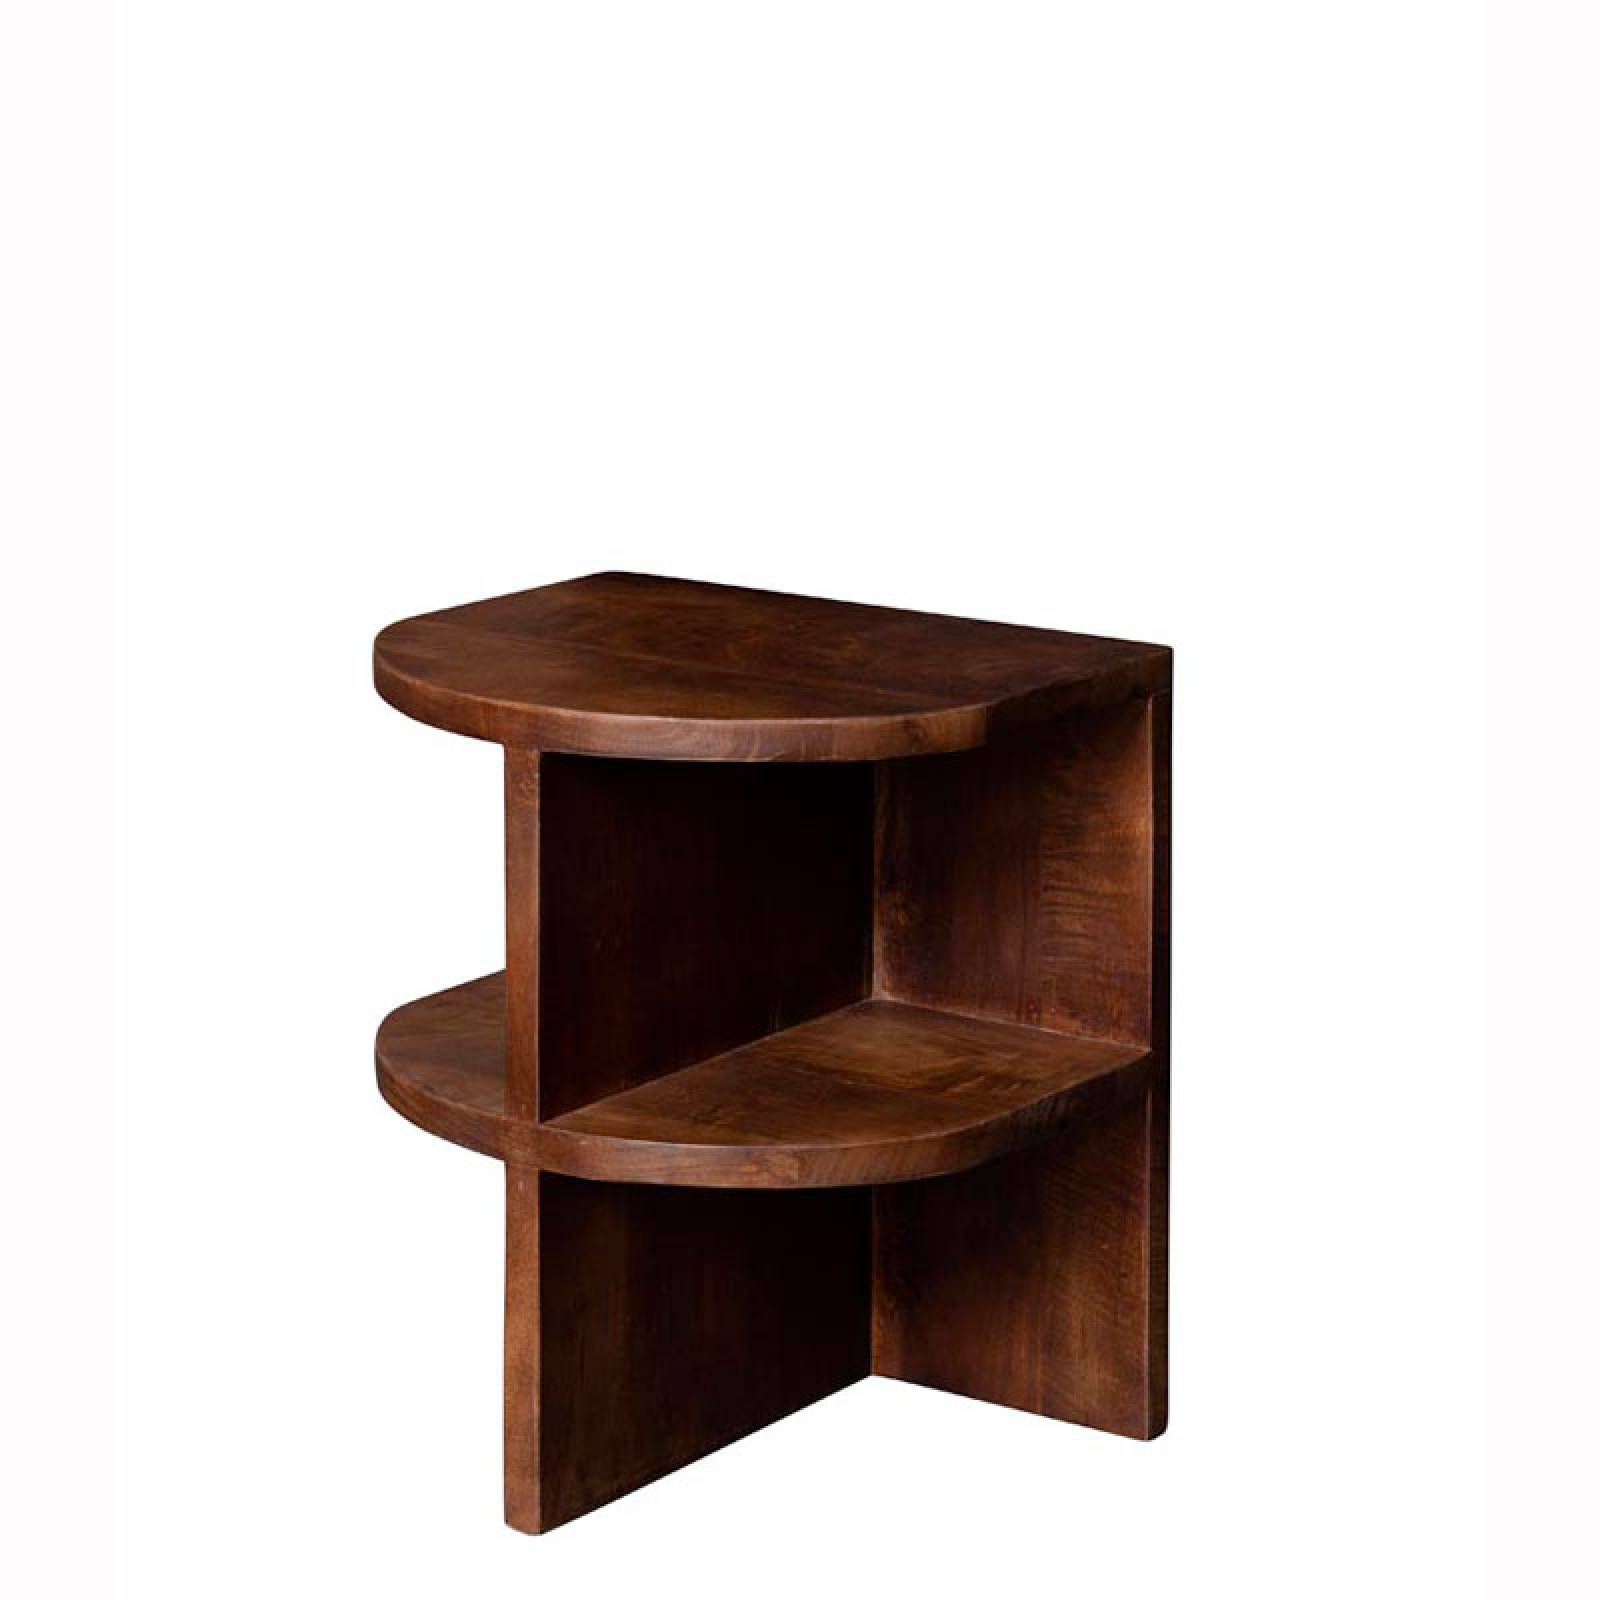 Wooden Curved Side Table With Shelves thumbnails